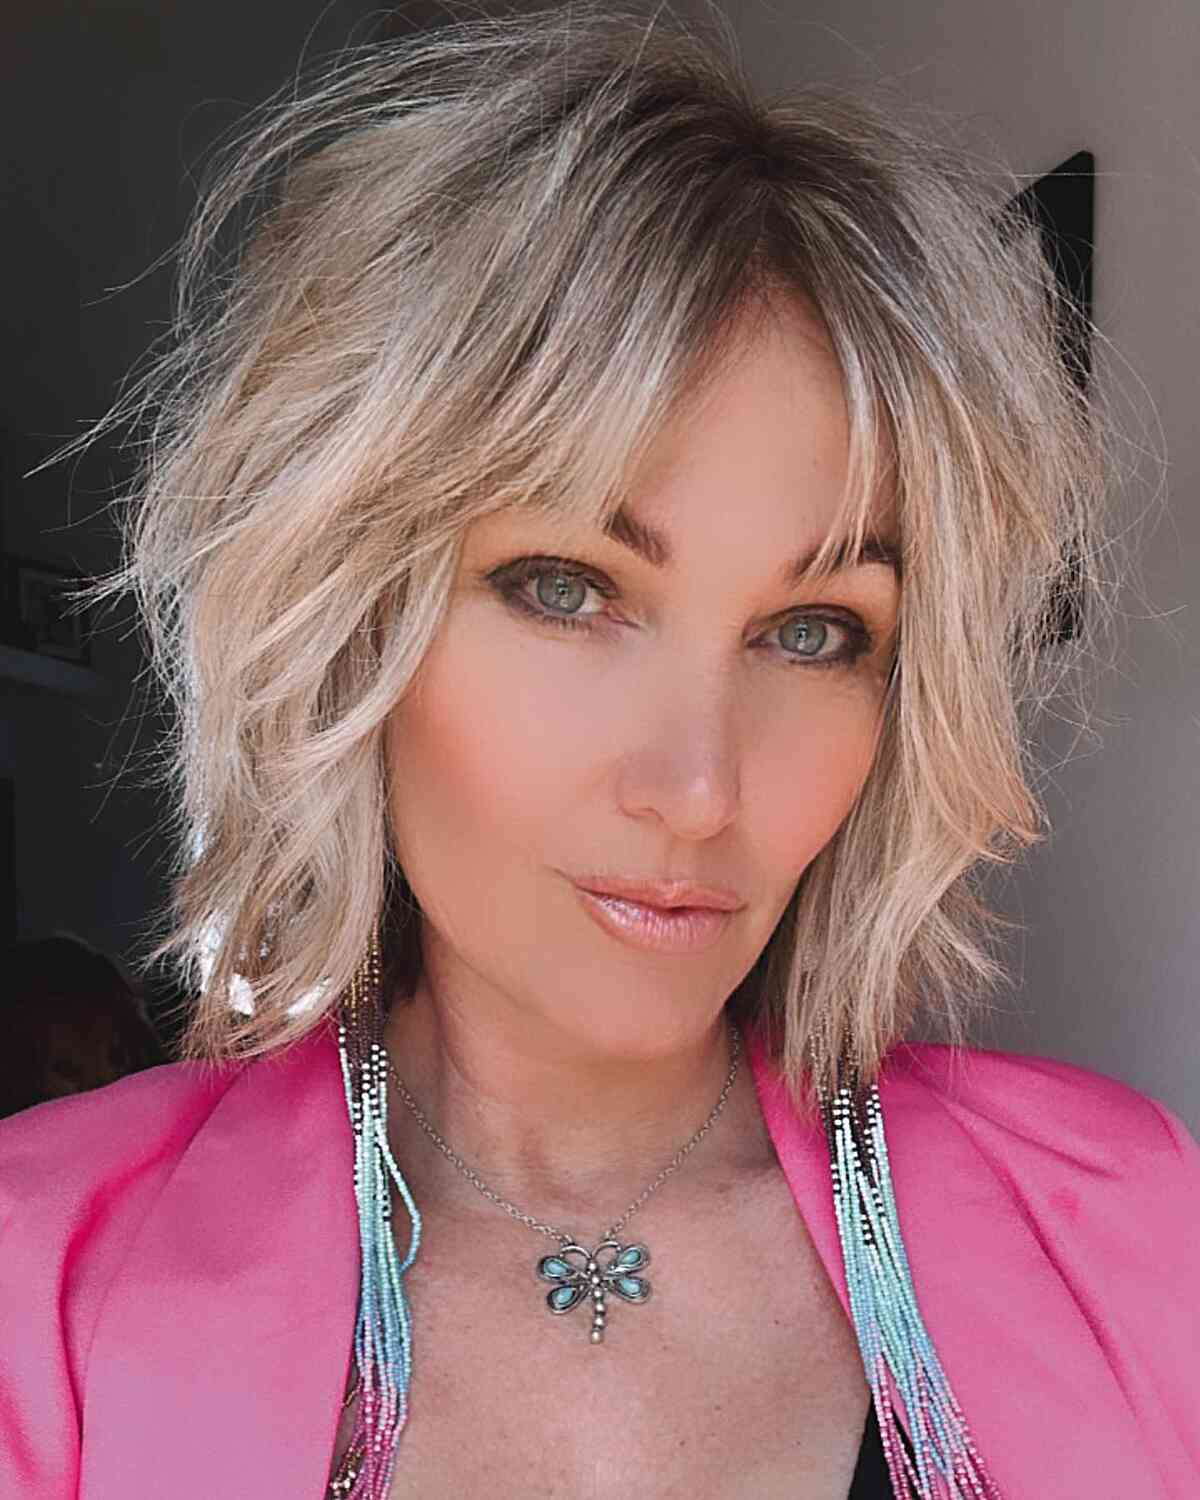 Messy Short Shaggy Hair with No Bangs for ladies with blonde balayage hair